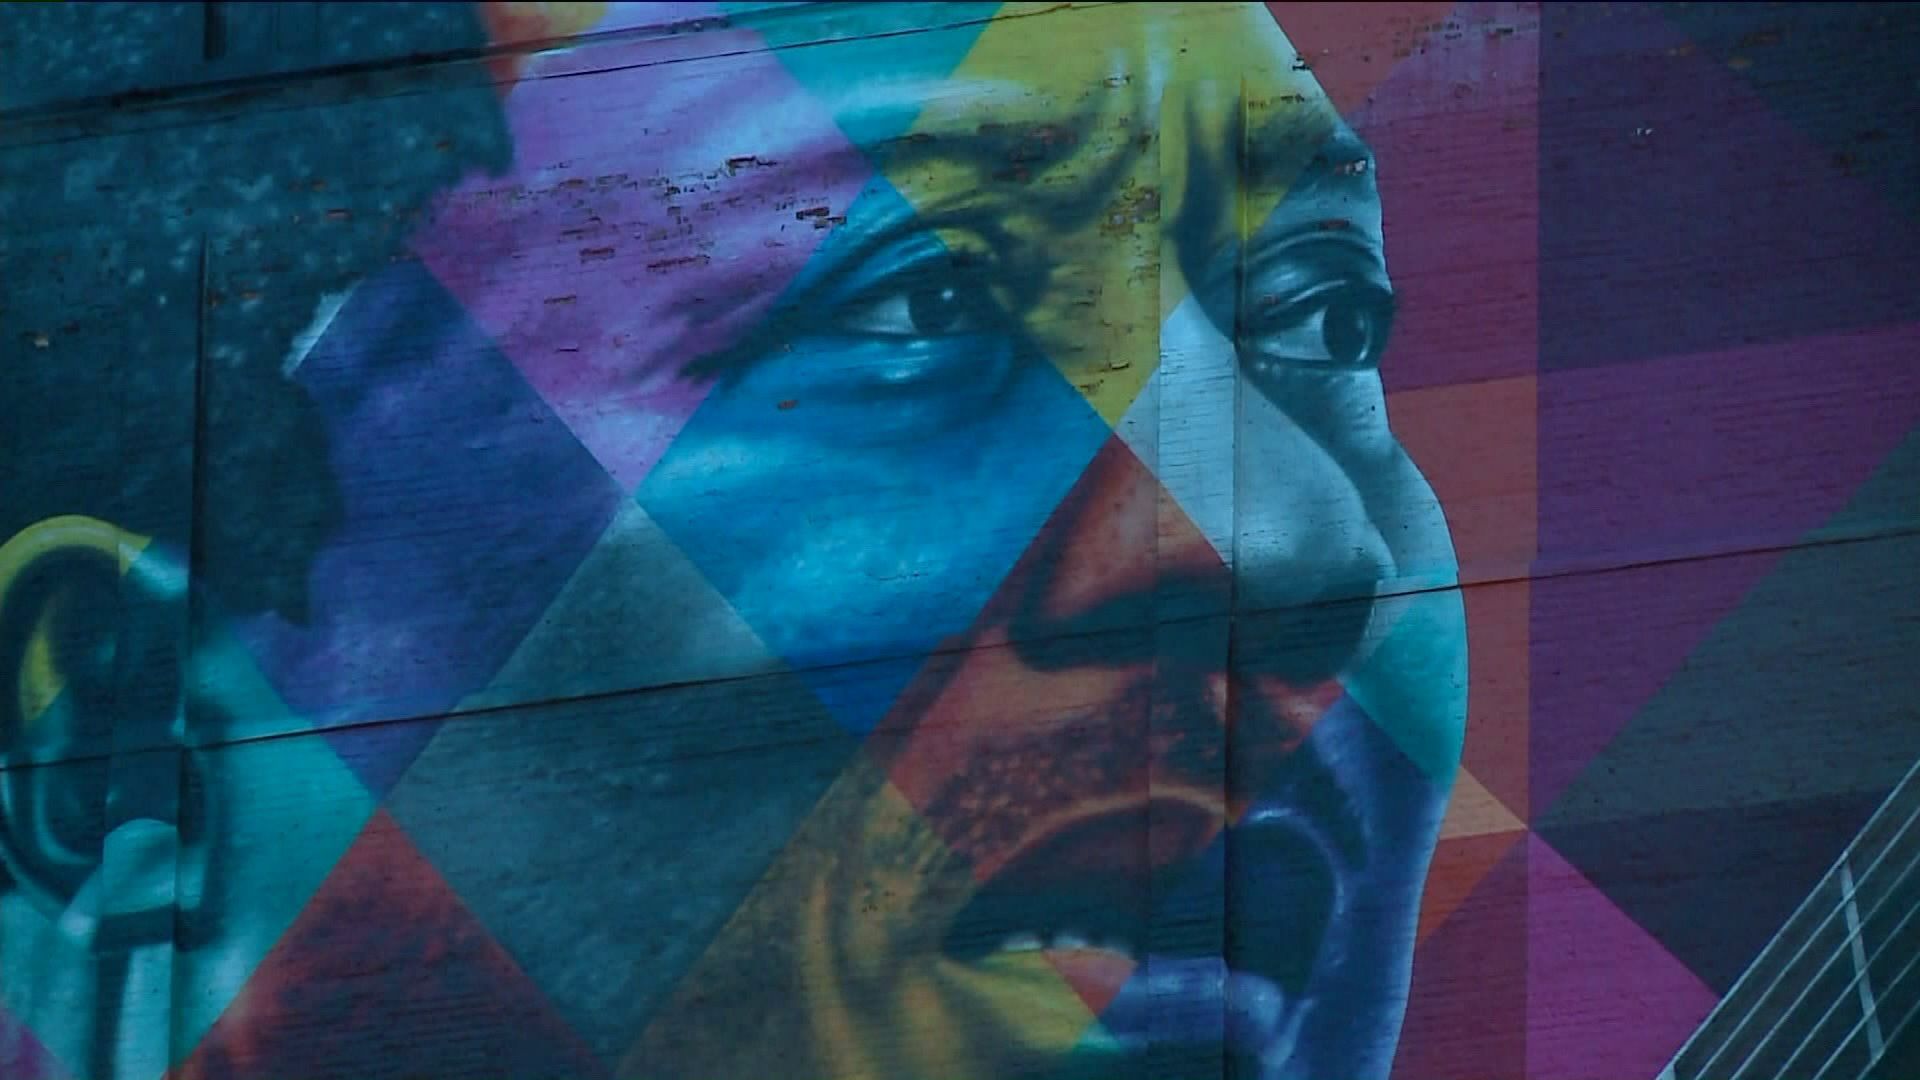 story mural of Blues Icon Muddy Waters .wgntv.com